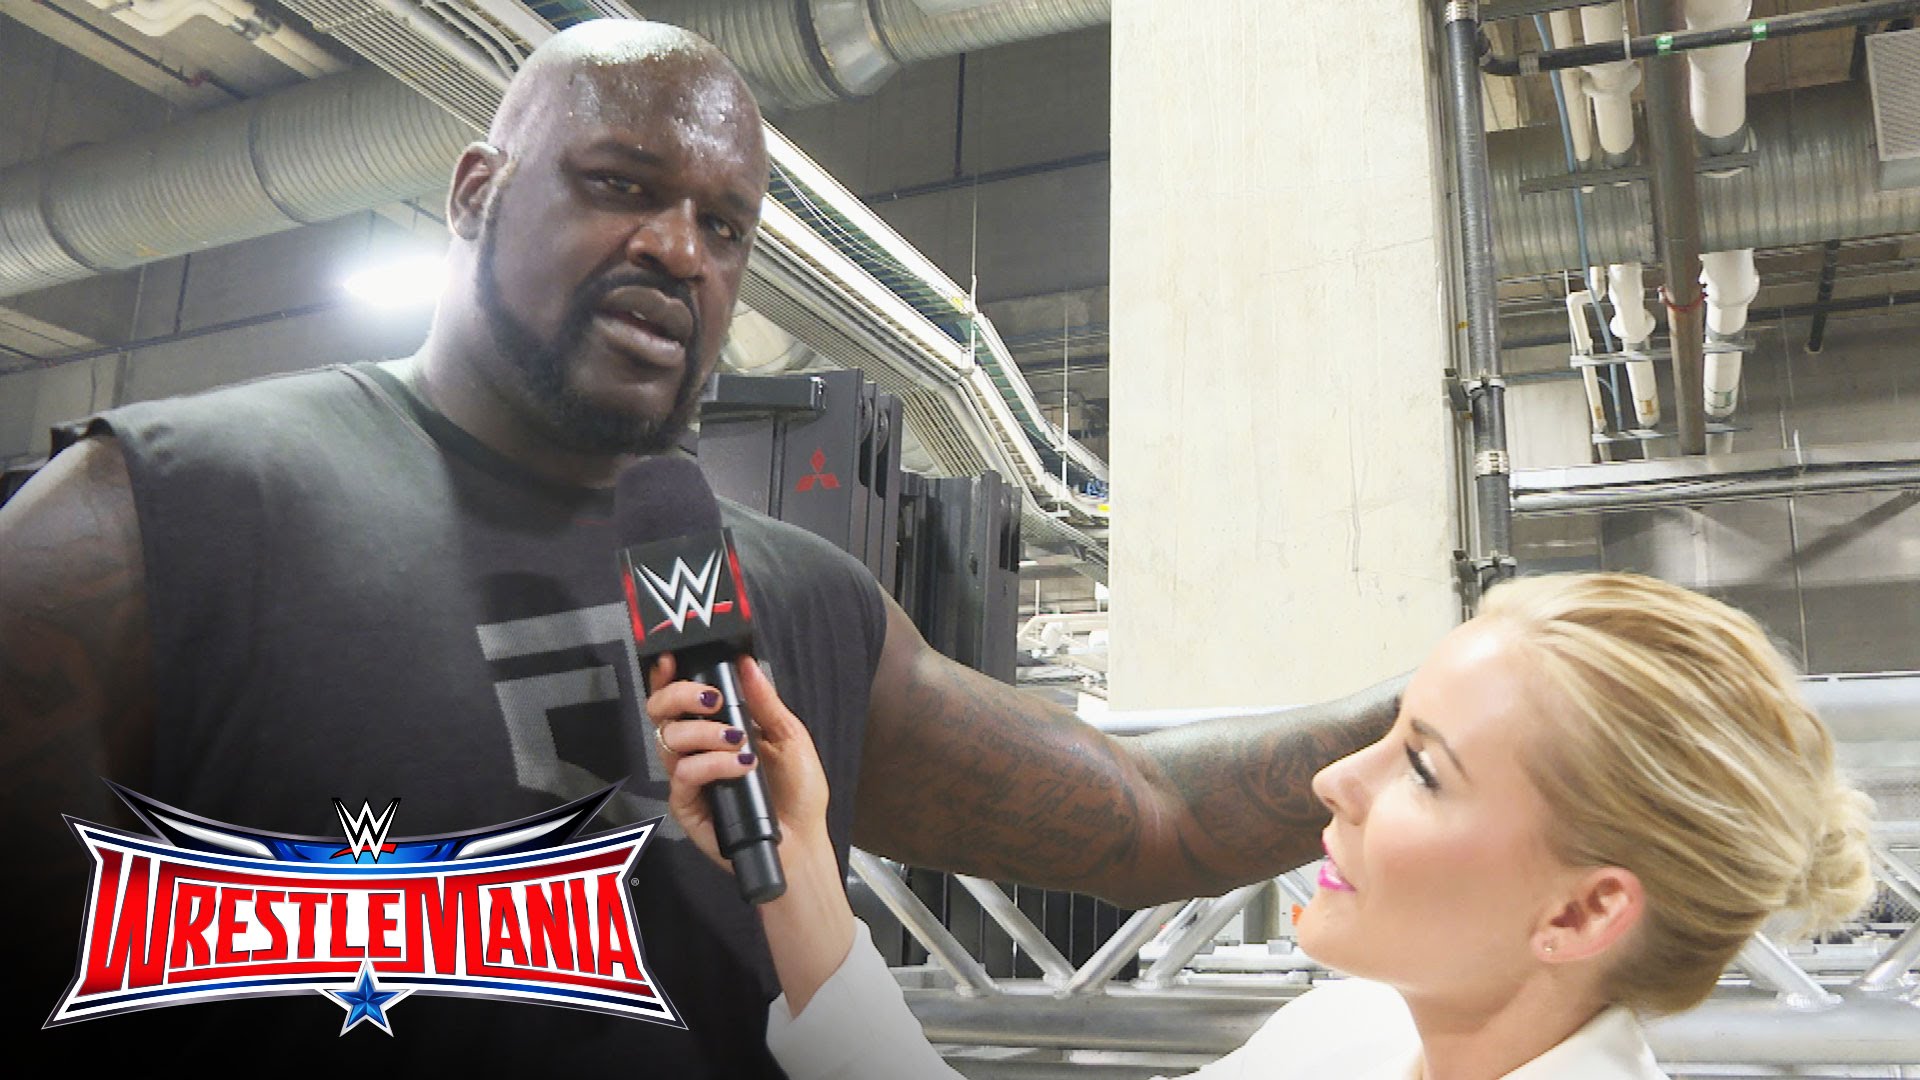 Shaq issues a challenge to Big Show after elimination at Wrestle Mania 32